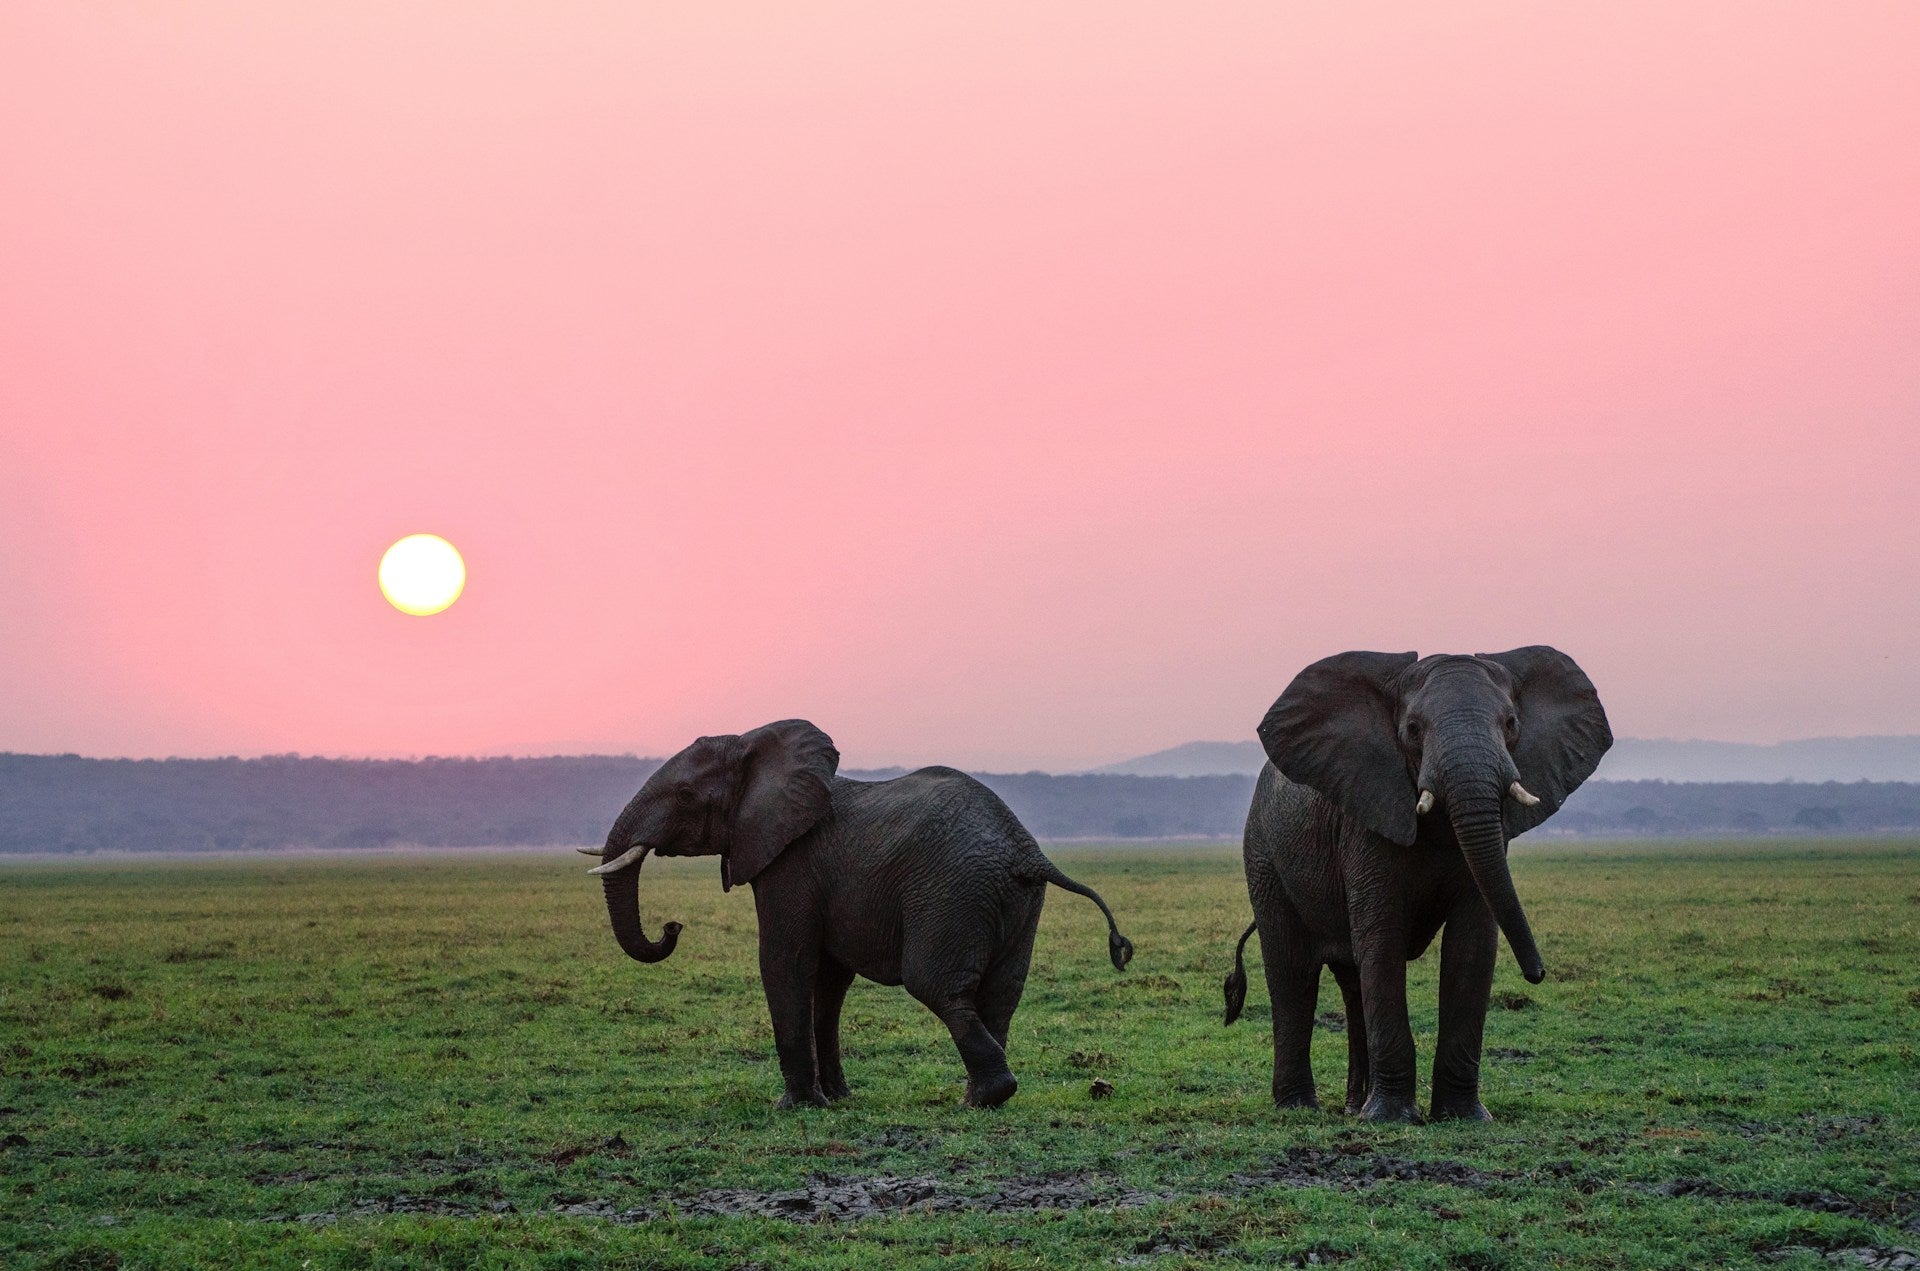 Two elephants with a vibrant pink sunset behind them